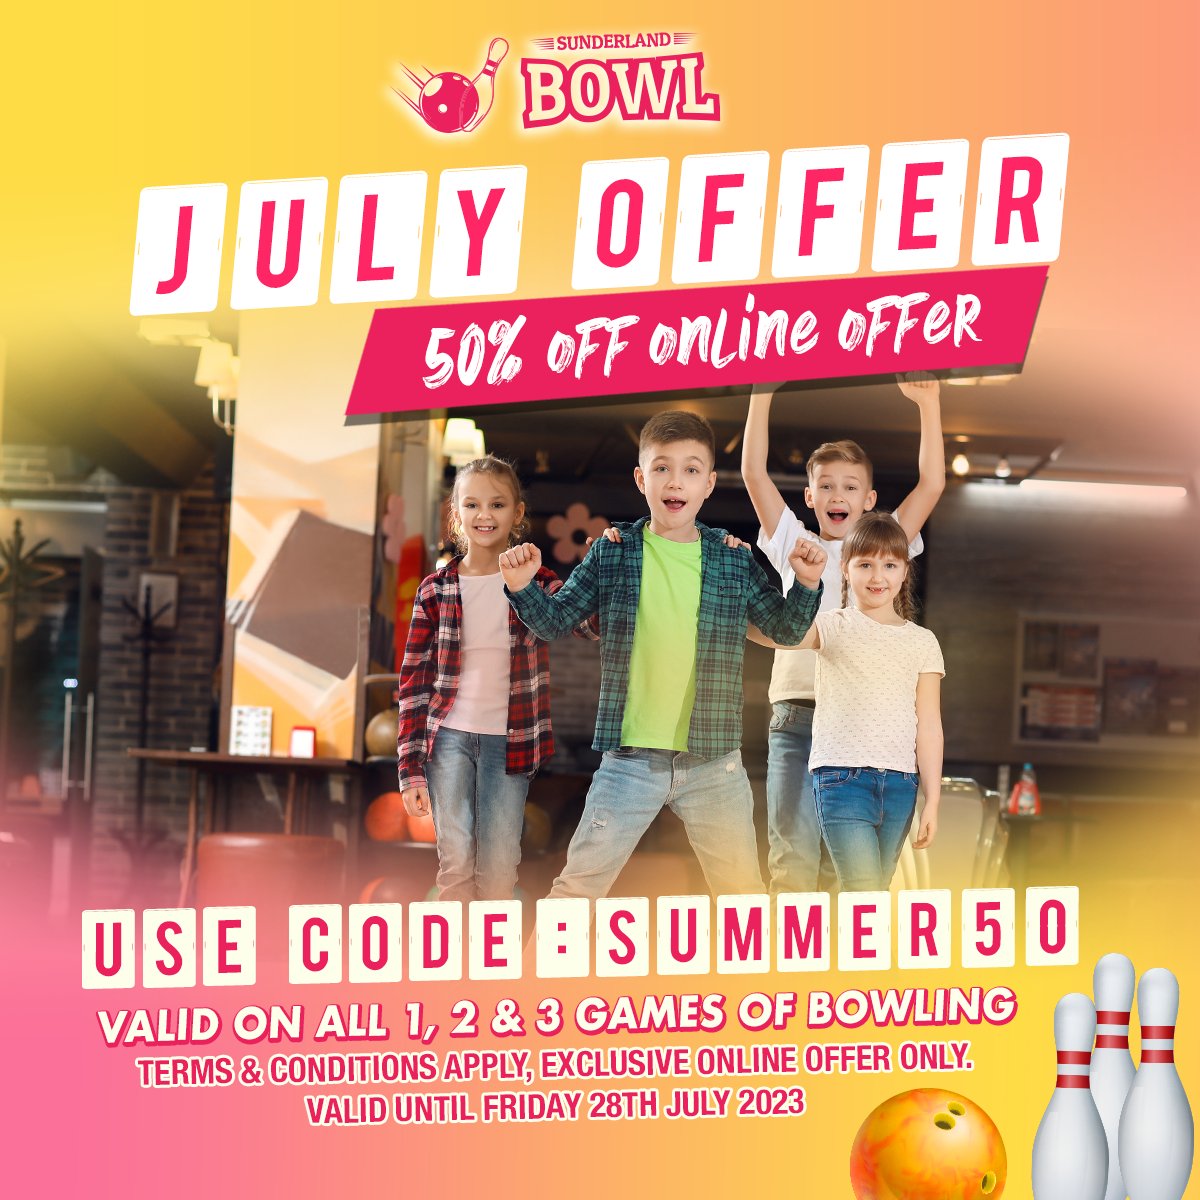 Enjoy our fantastic 50% off 1, 2 & 3 games of bowling 🌞
Use Code: SUMMER50 at checkout 🛒

July Exclusive Online Offer - Available till Friday 28th July 2023 ✨

To book your bowl please visit:
sunderlandbowl.co.uk 📲

#SunderlandBowl #Sunderland #Bowl #OnlineExclusive